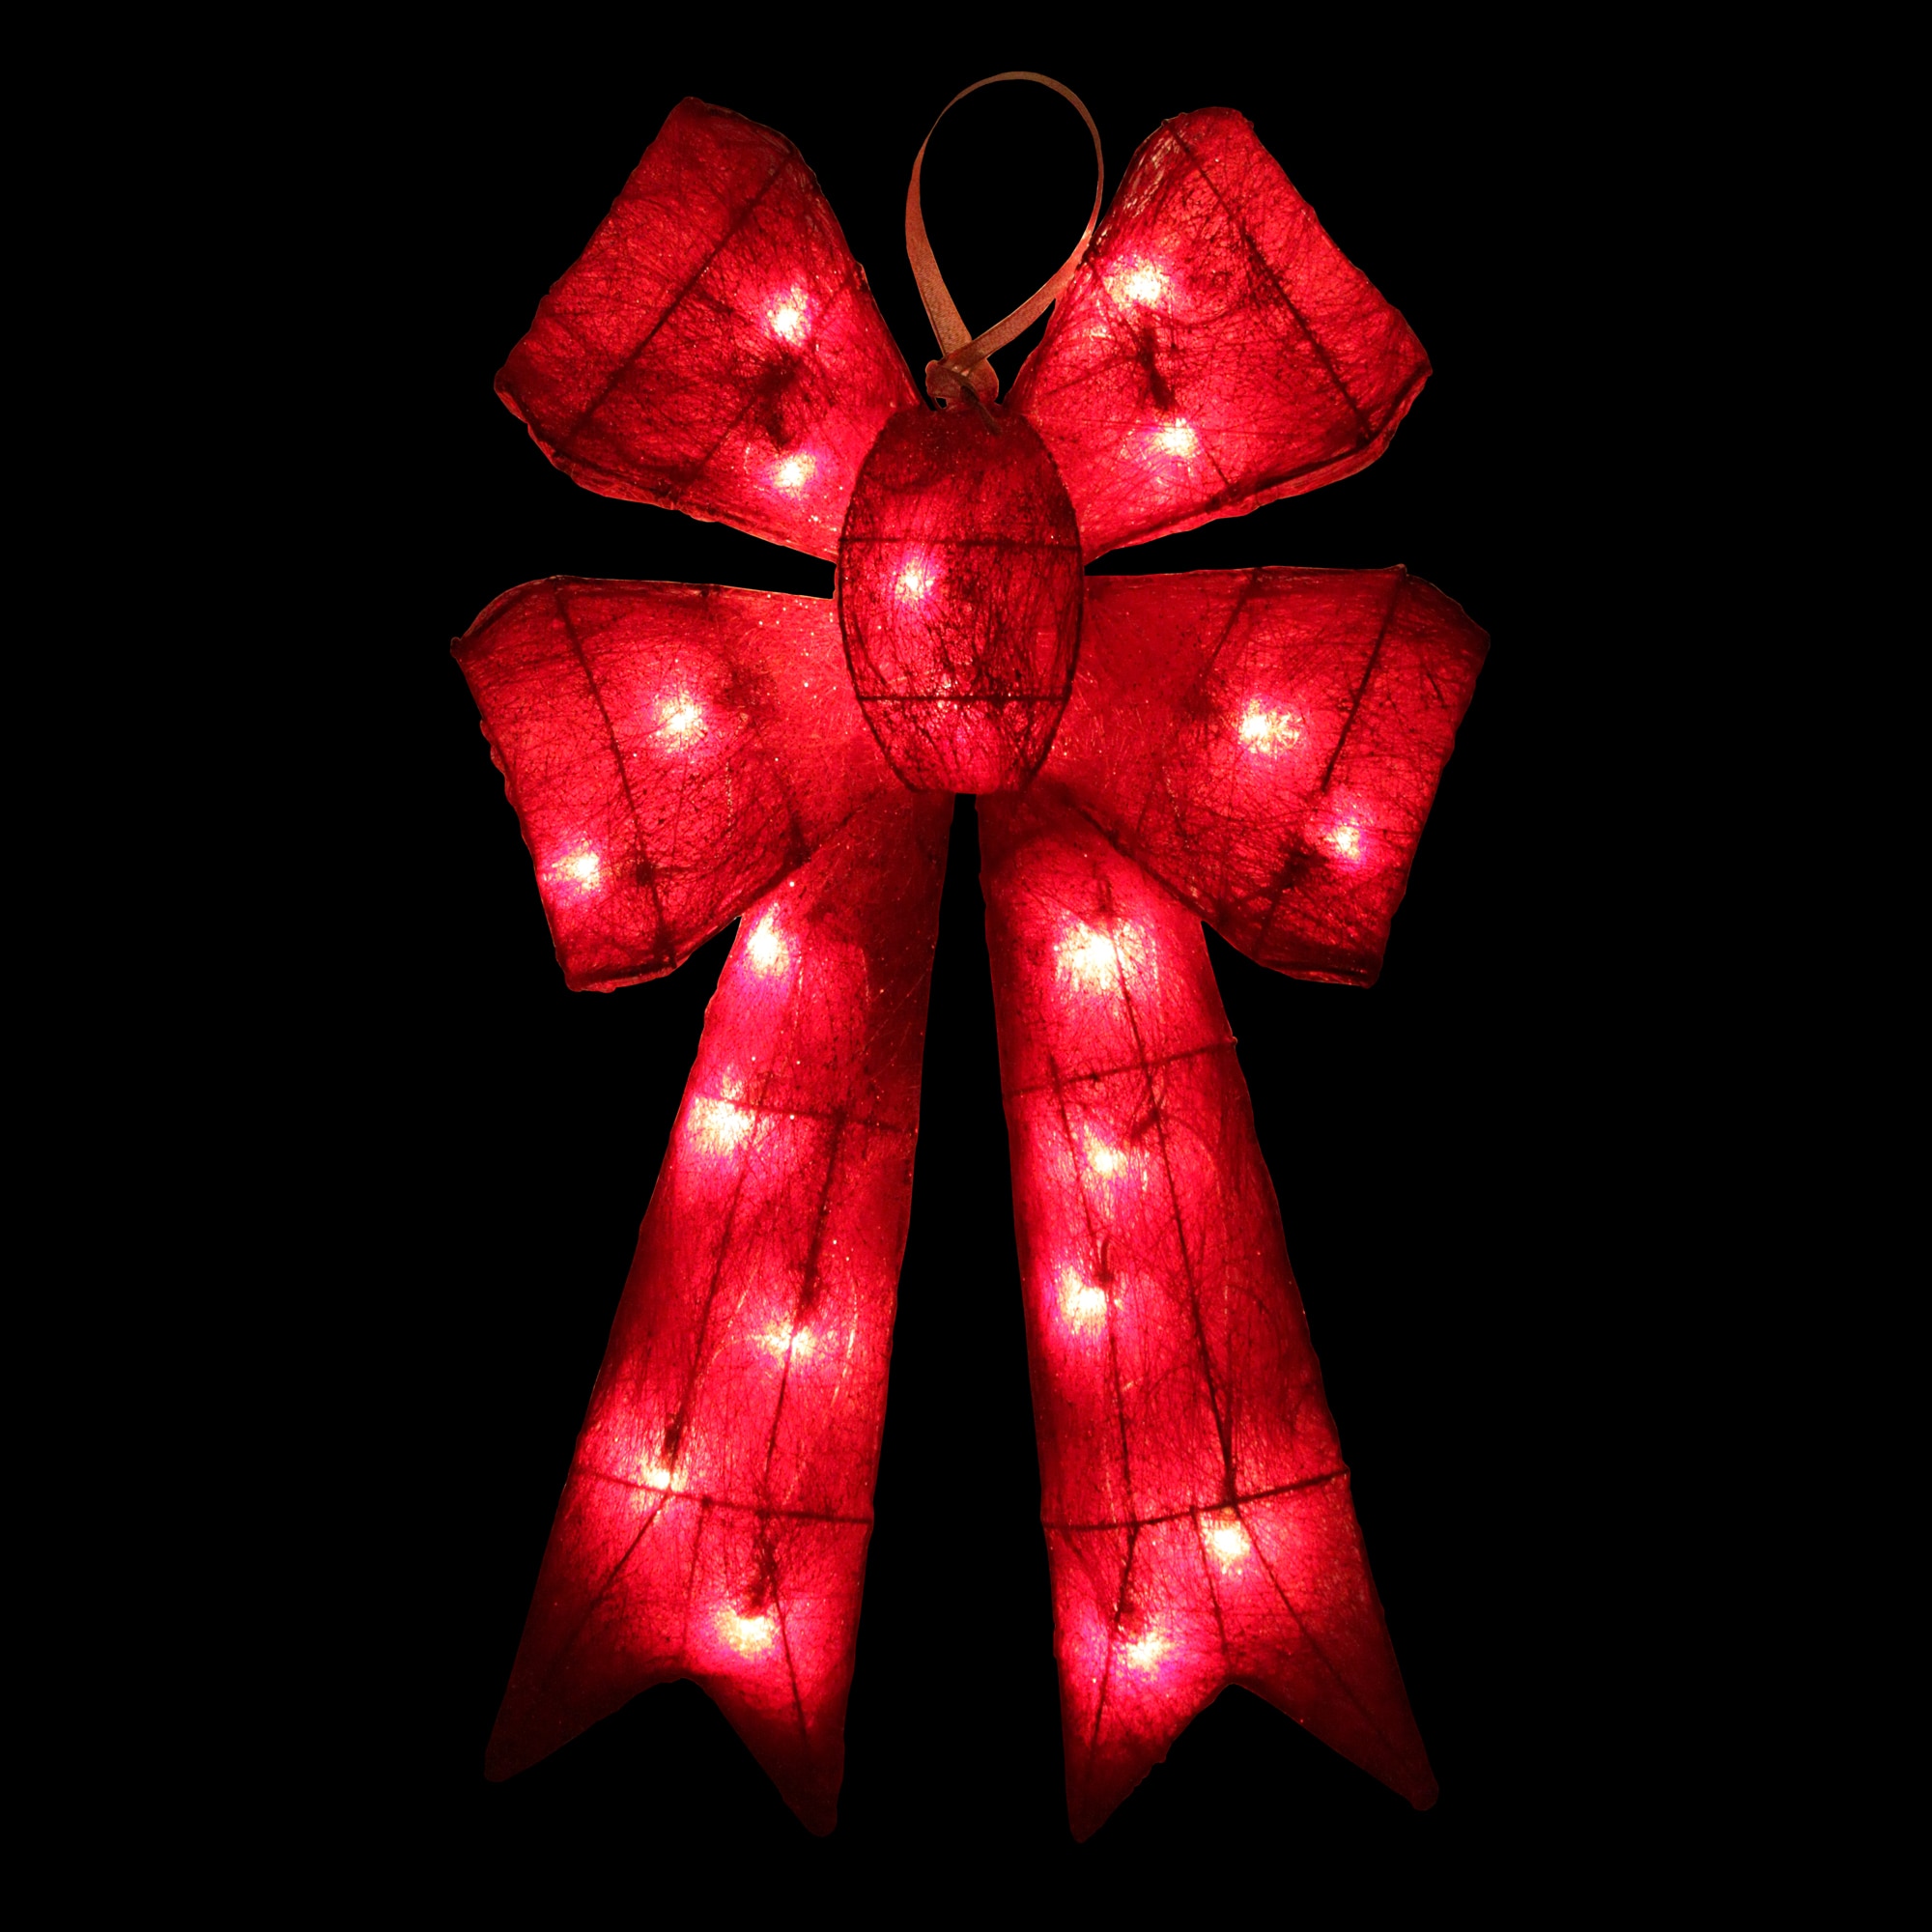 Northlight 16 Led Lighted Red Burlap Bow Christmas Decoration